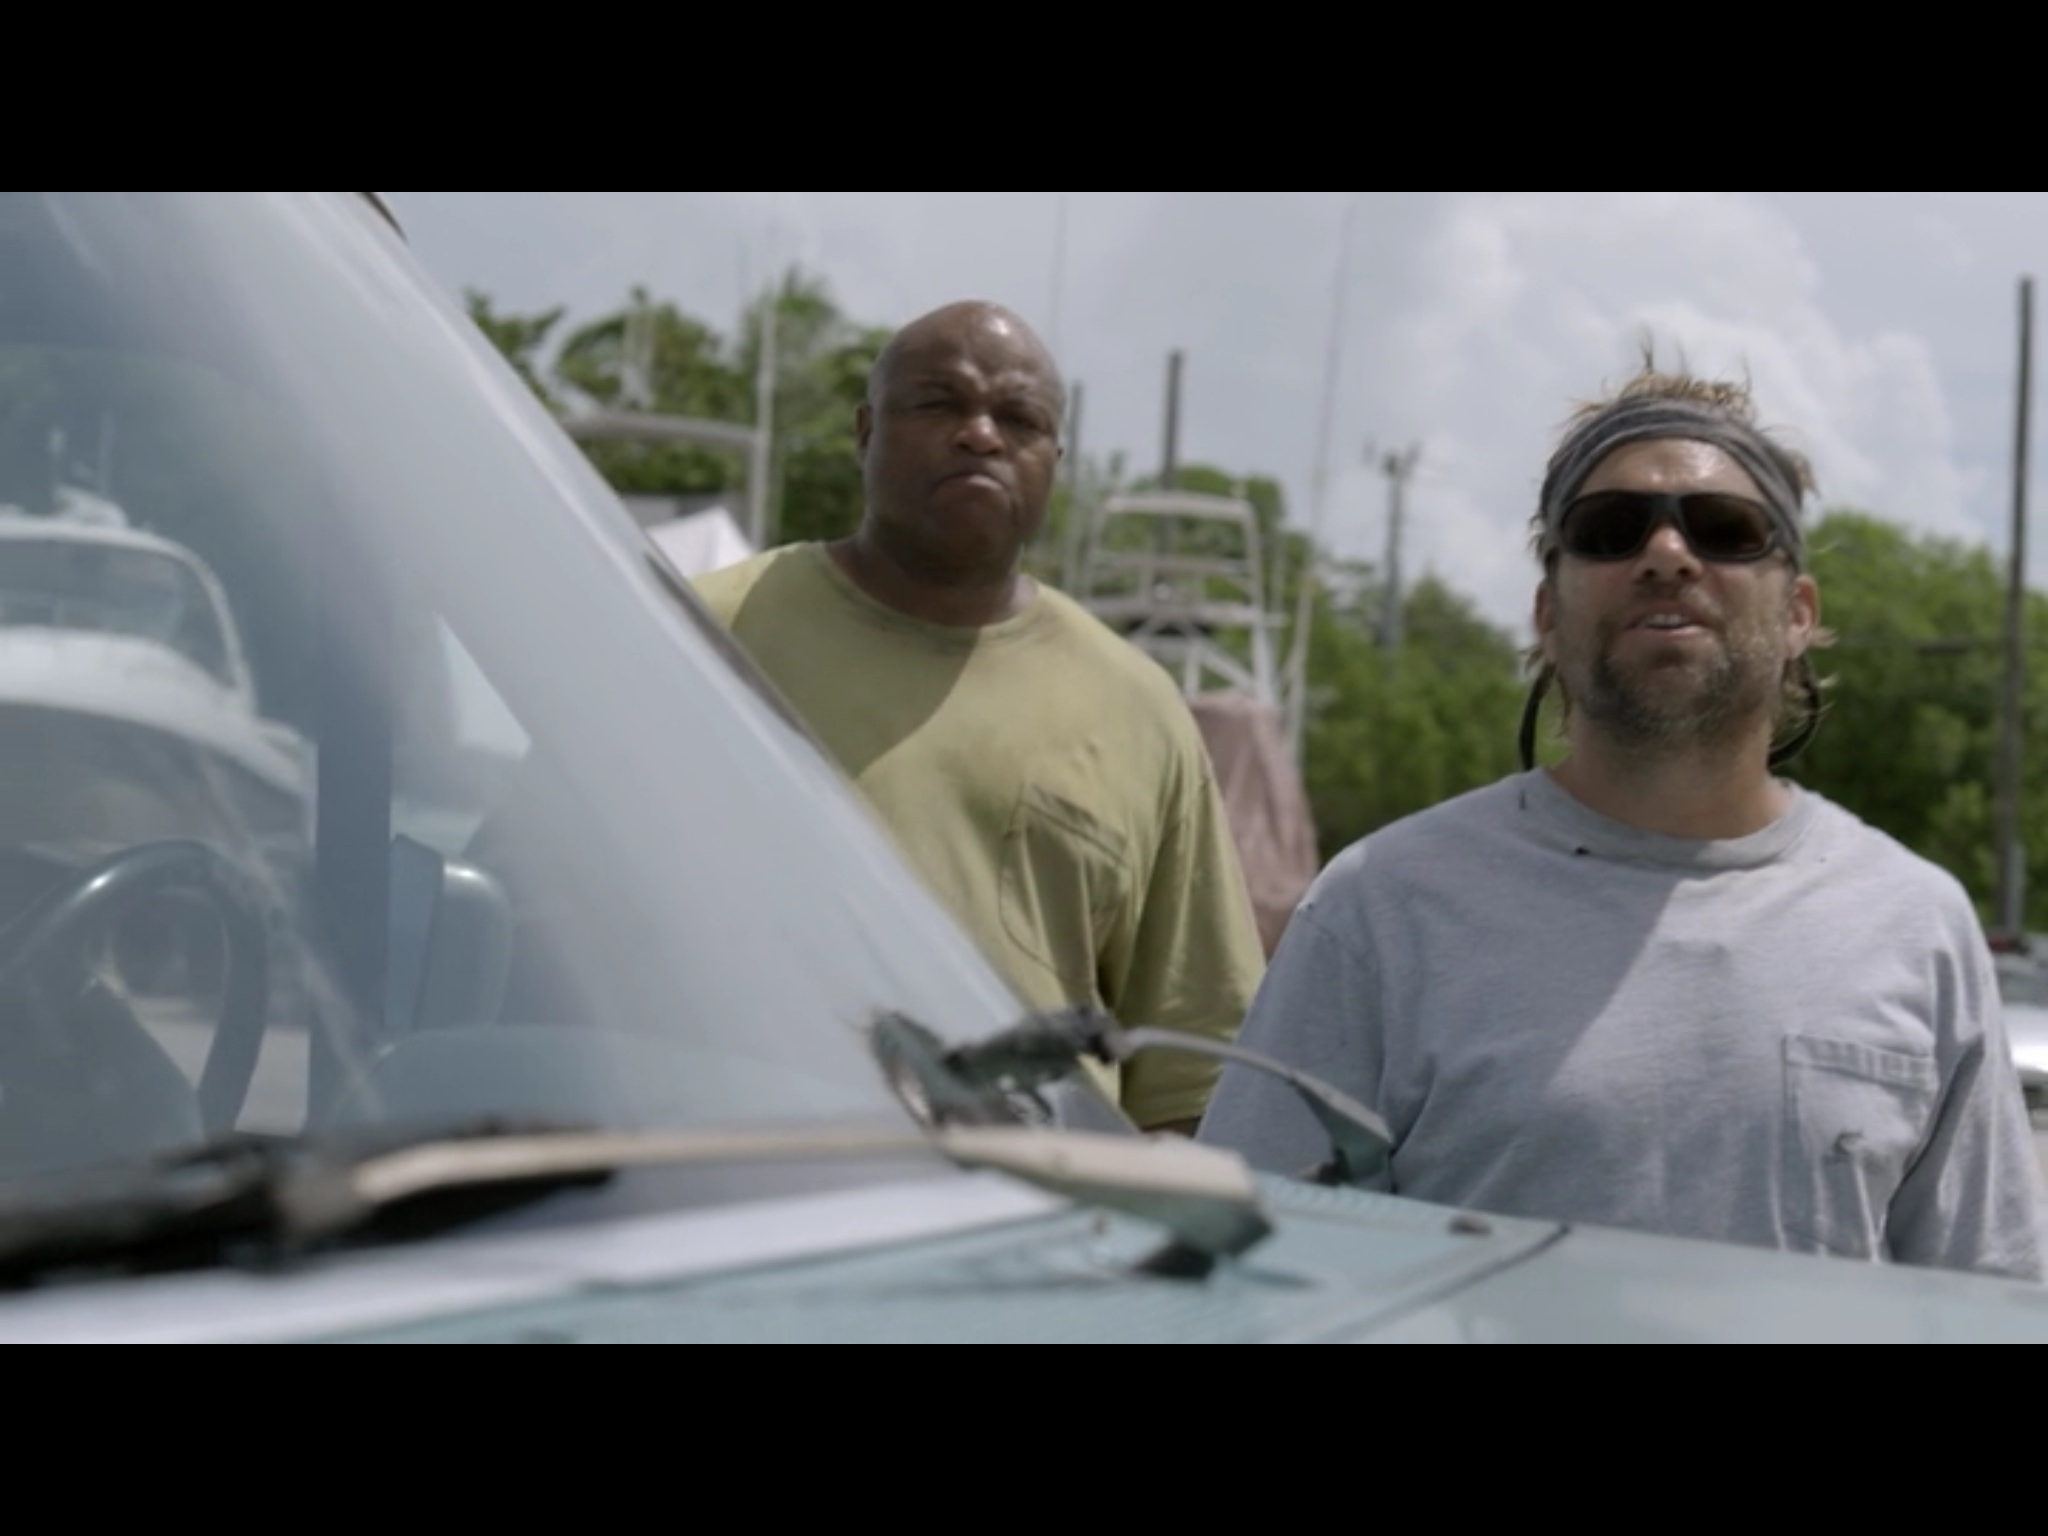 Still of Michael Beasley and Norbert Leo Butz in 